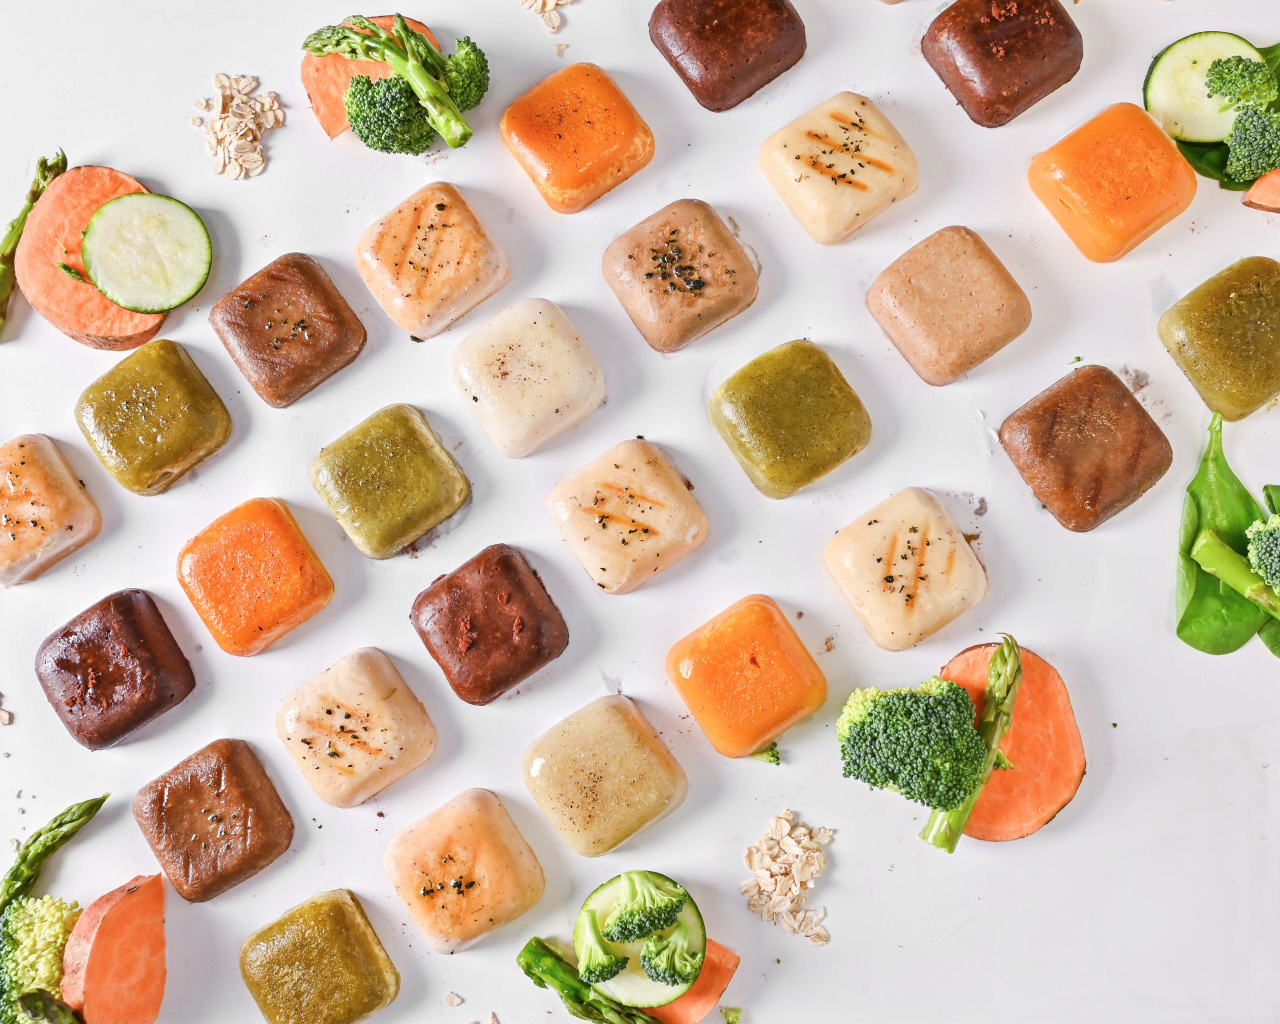 SQUAREAT an Innovative Food Concept, Meals in Squares for People of Any Age Who Are Seeking a Healthy Lifestyle